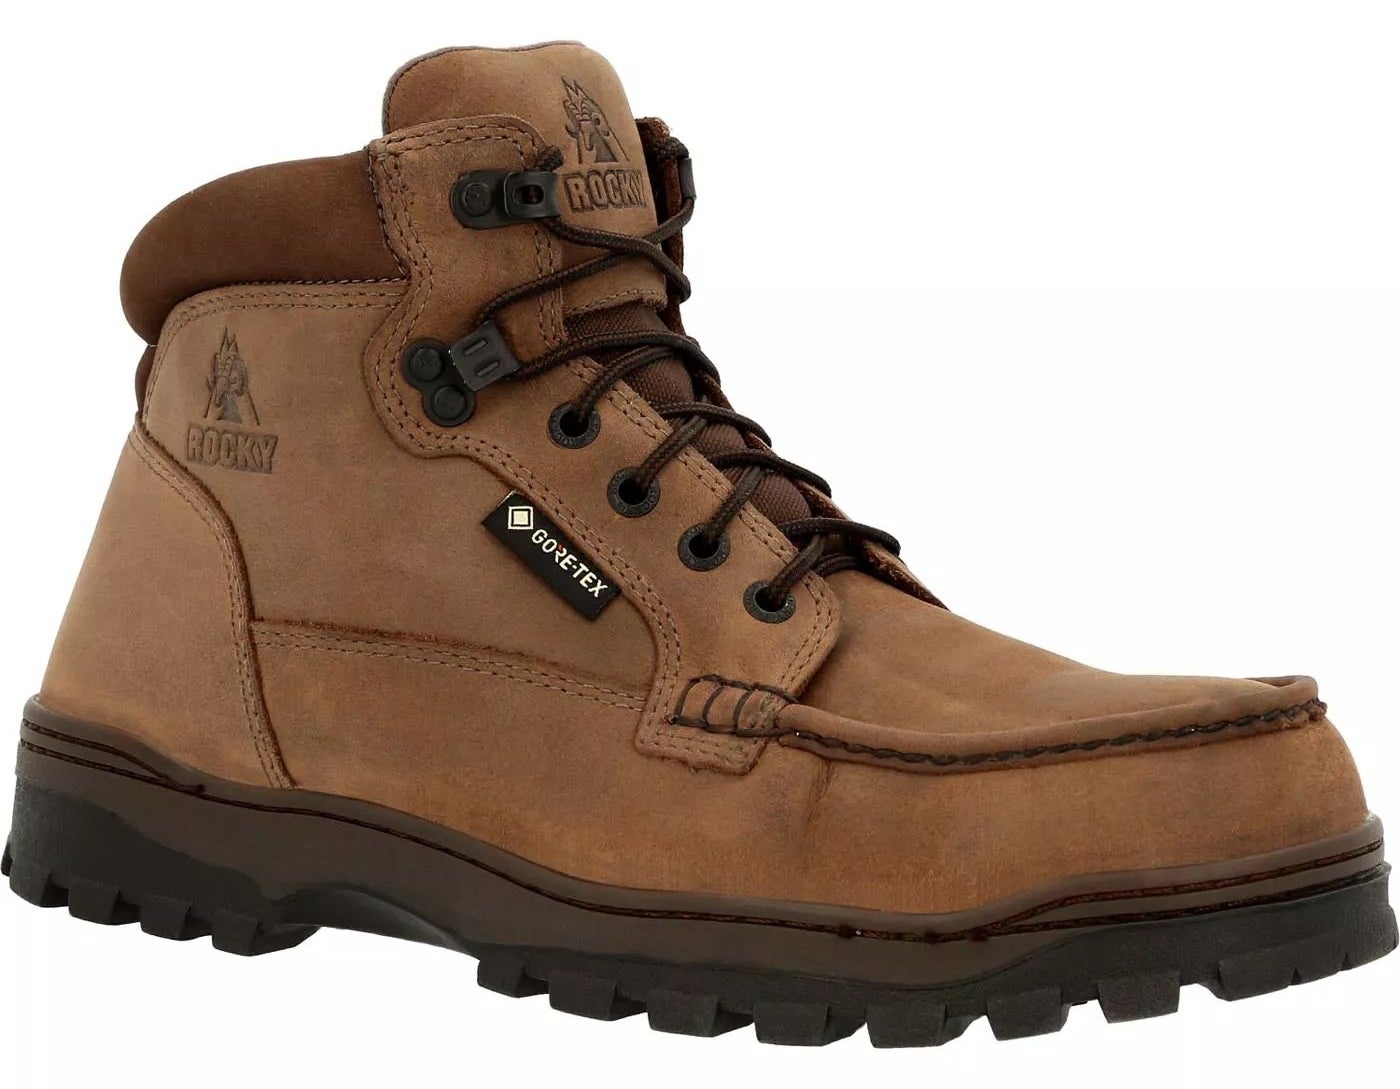 Work boots in light brown